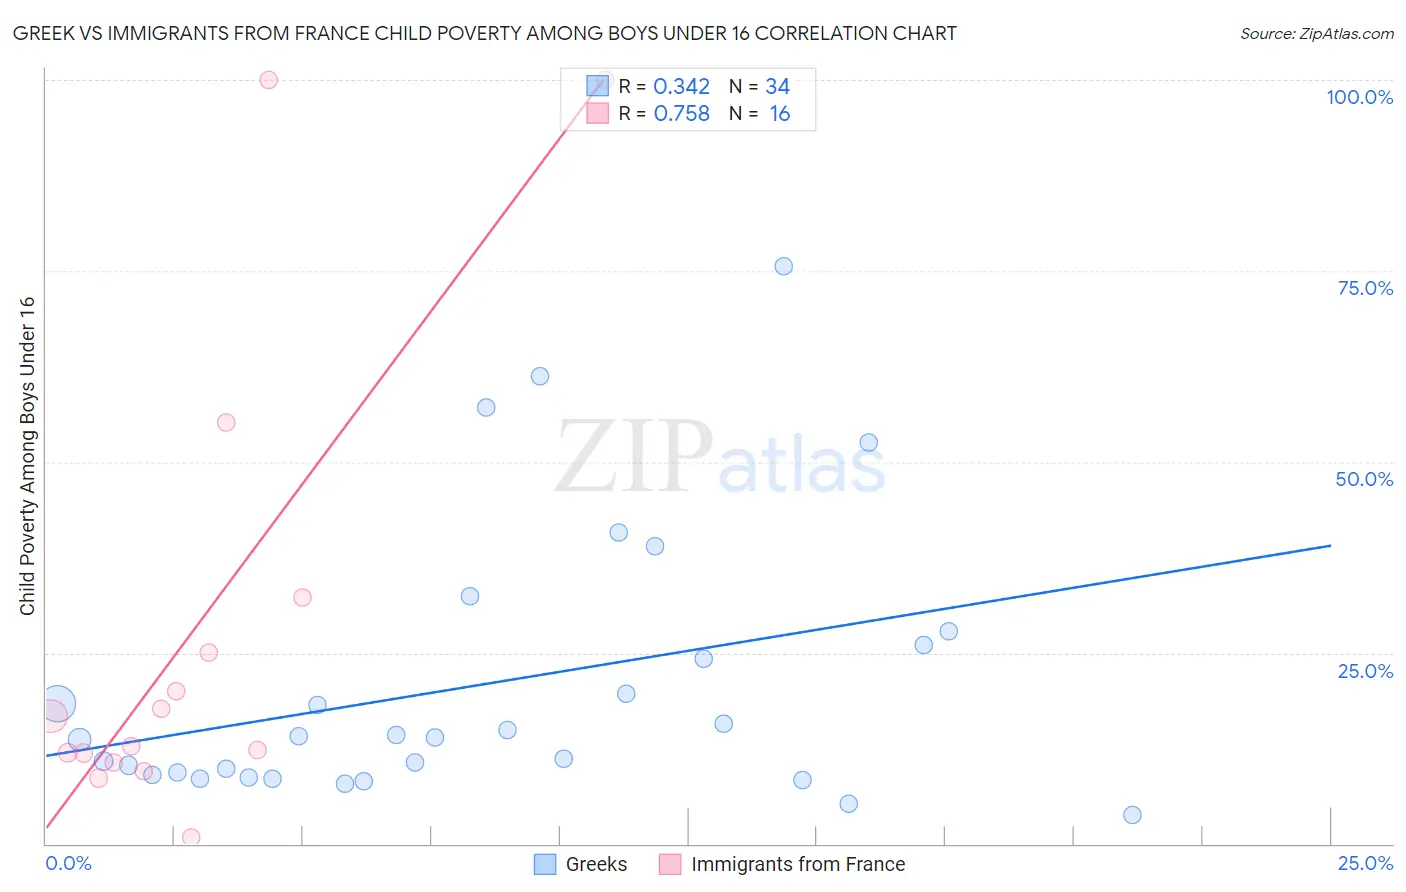 Greek vs Immigrants from France Child Poverty Among Boys Under 16